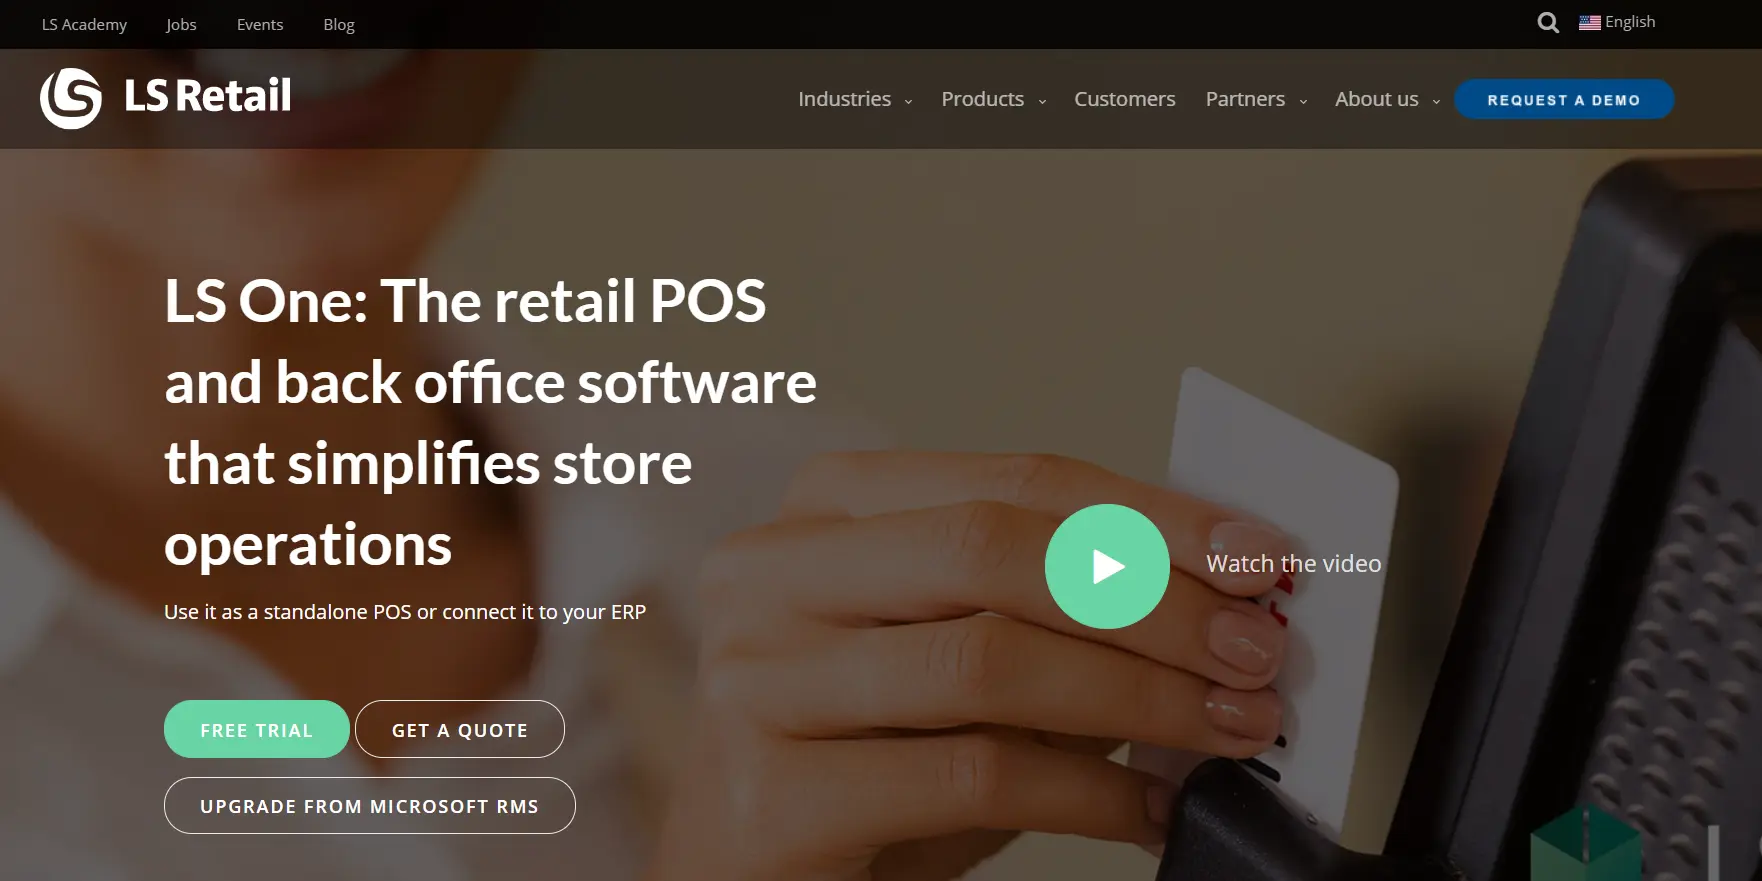 LS One POS system